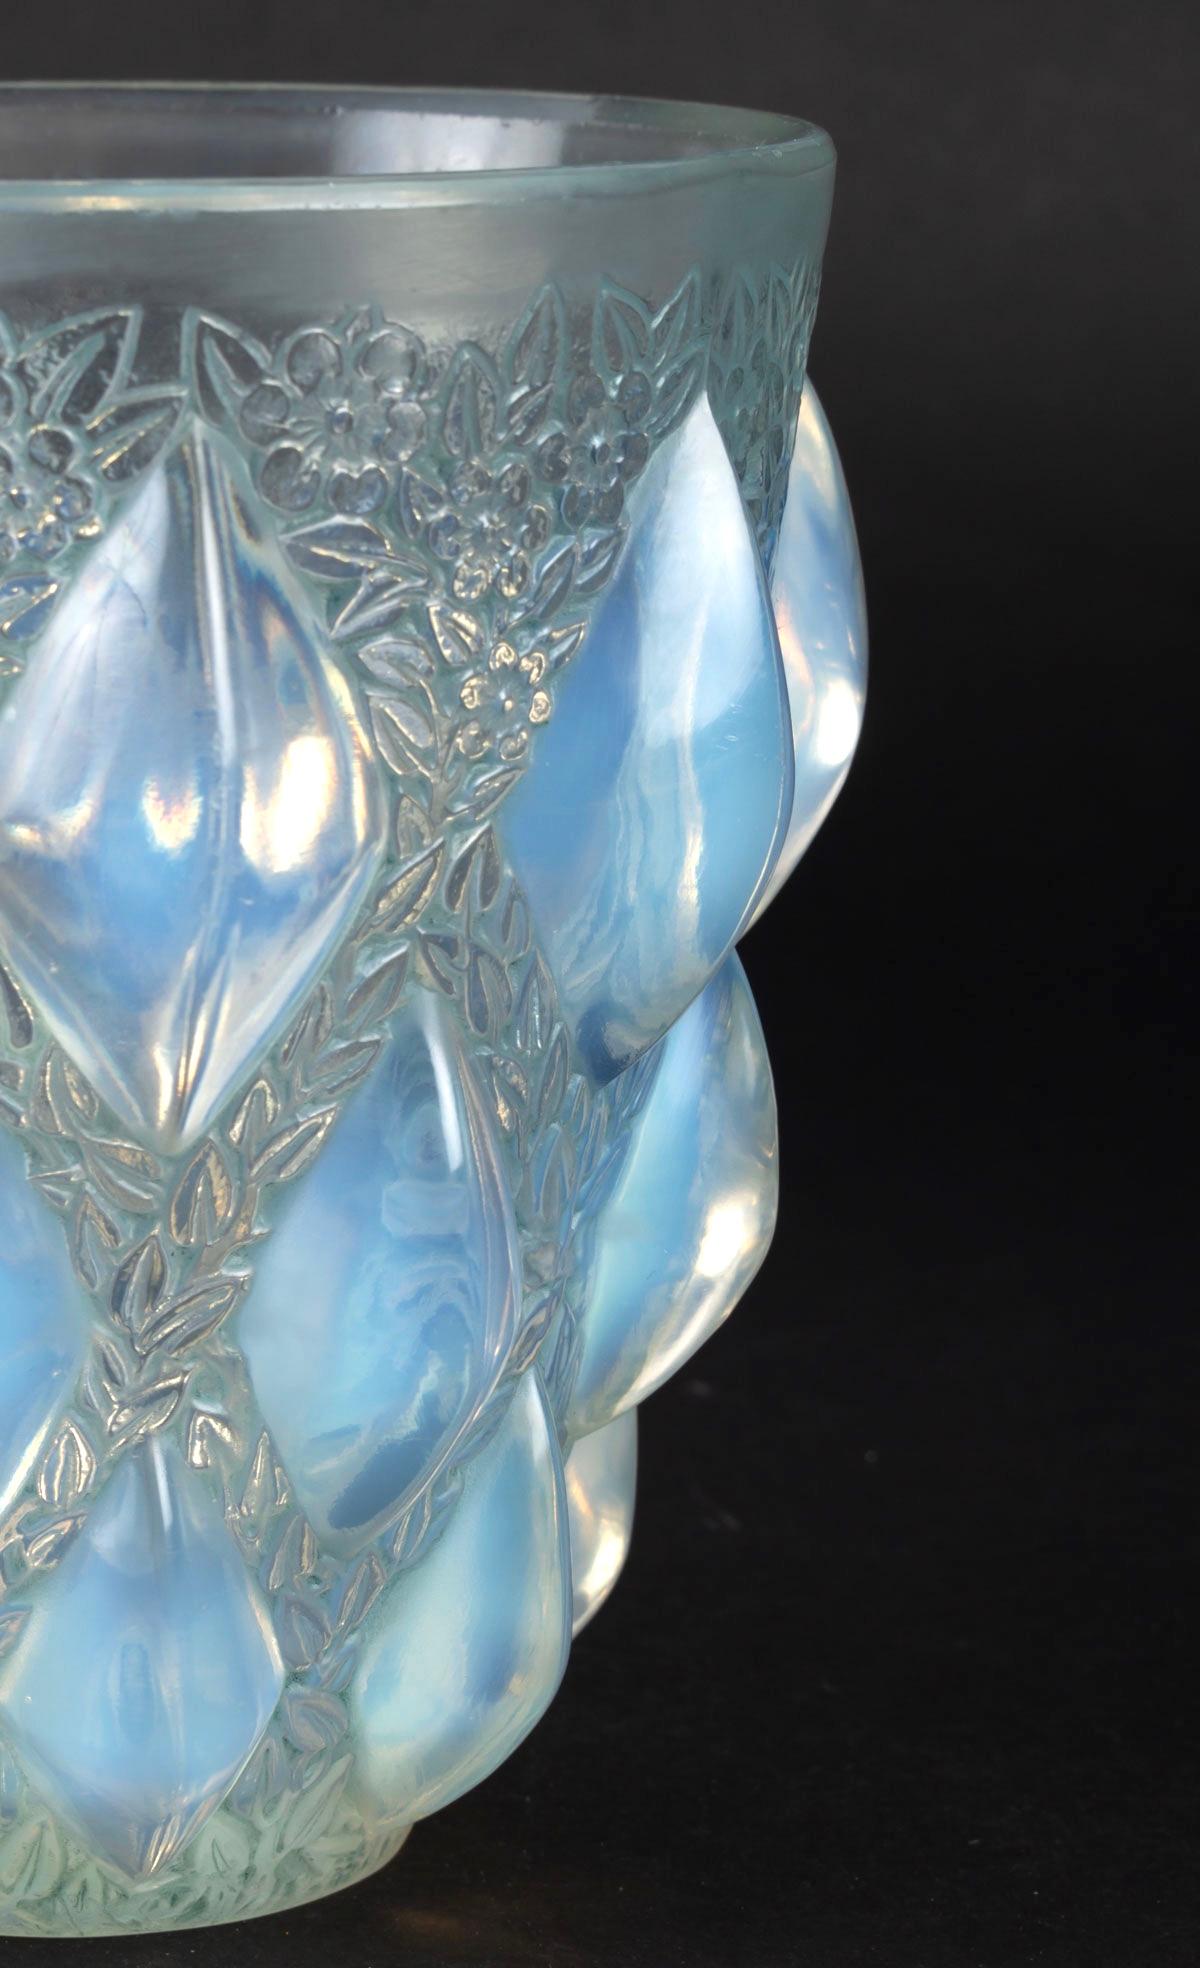 French 1927 René Lalique Rampillon Vase in Opalescent Glass with Blue-Green Patina